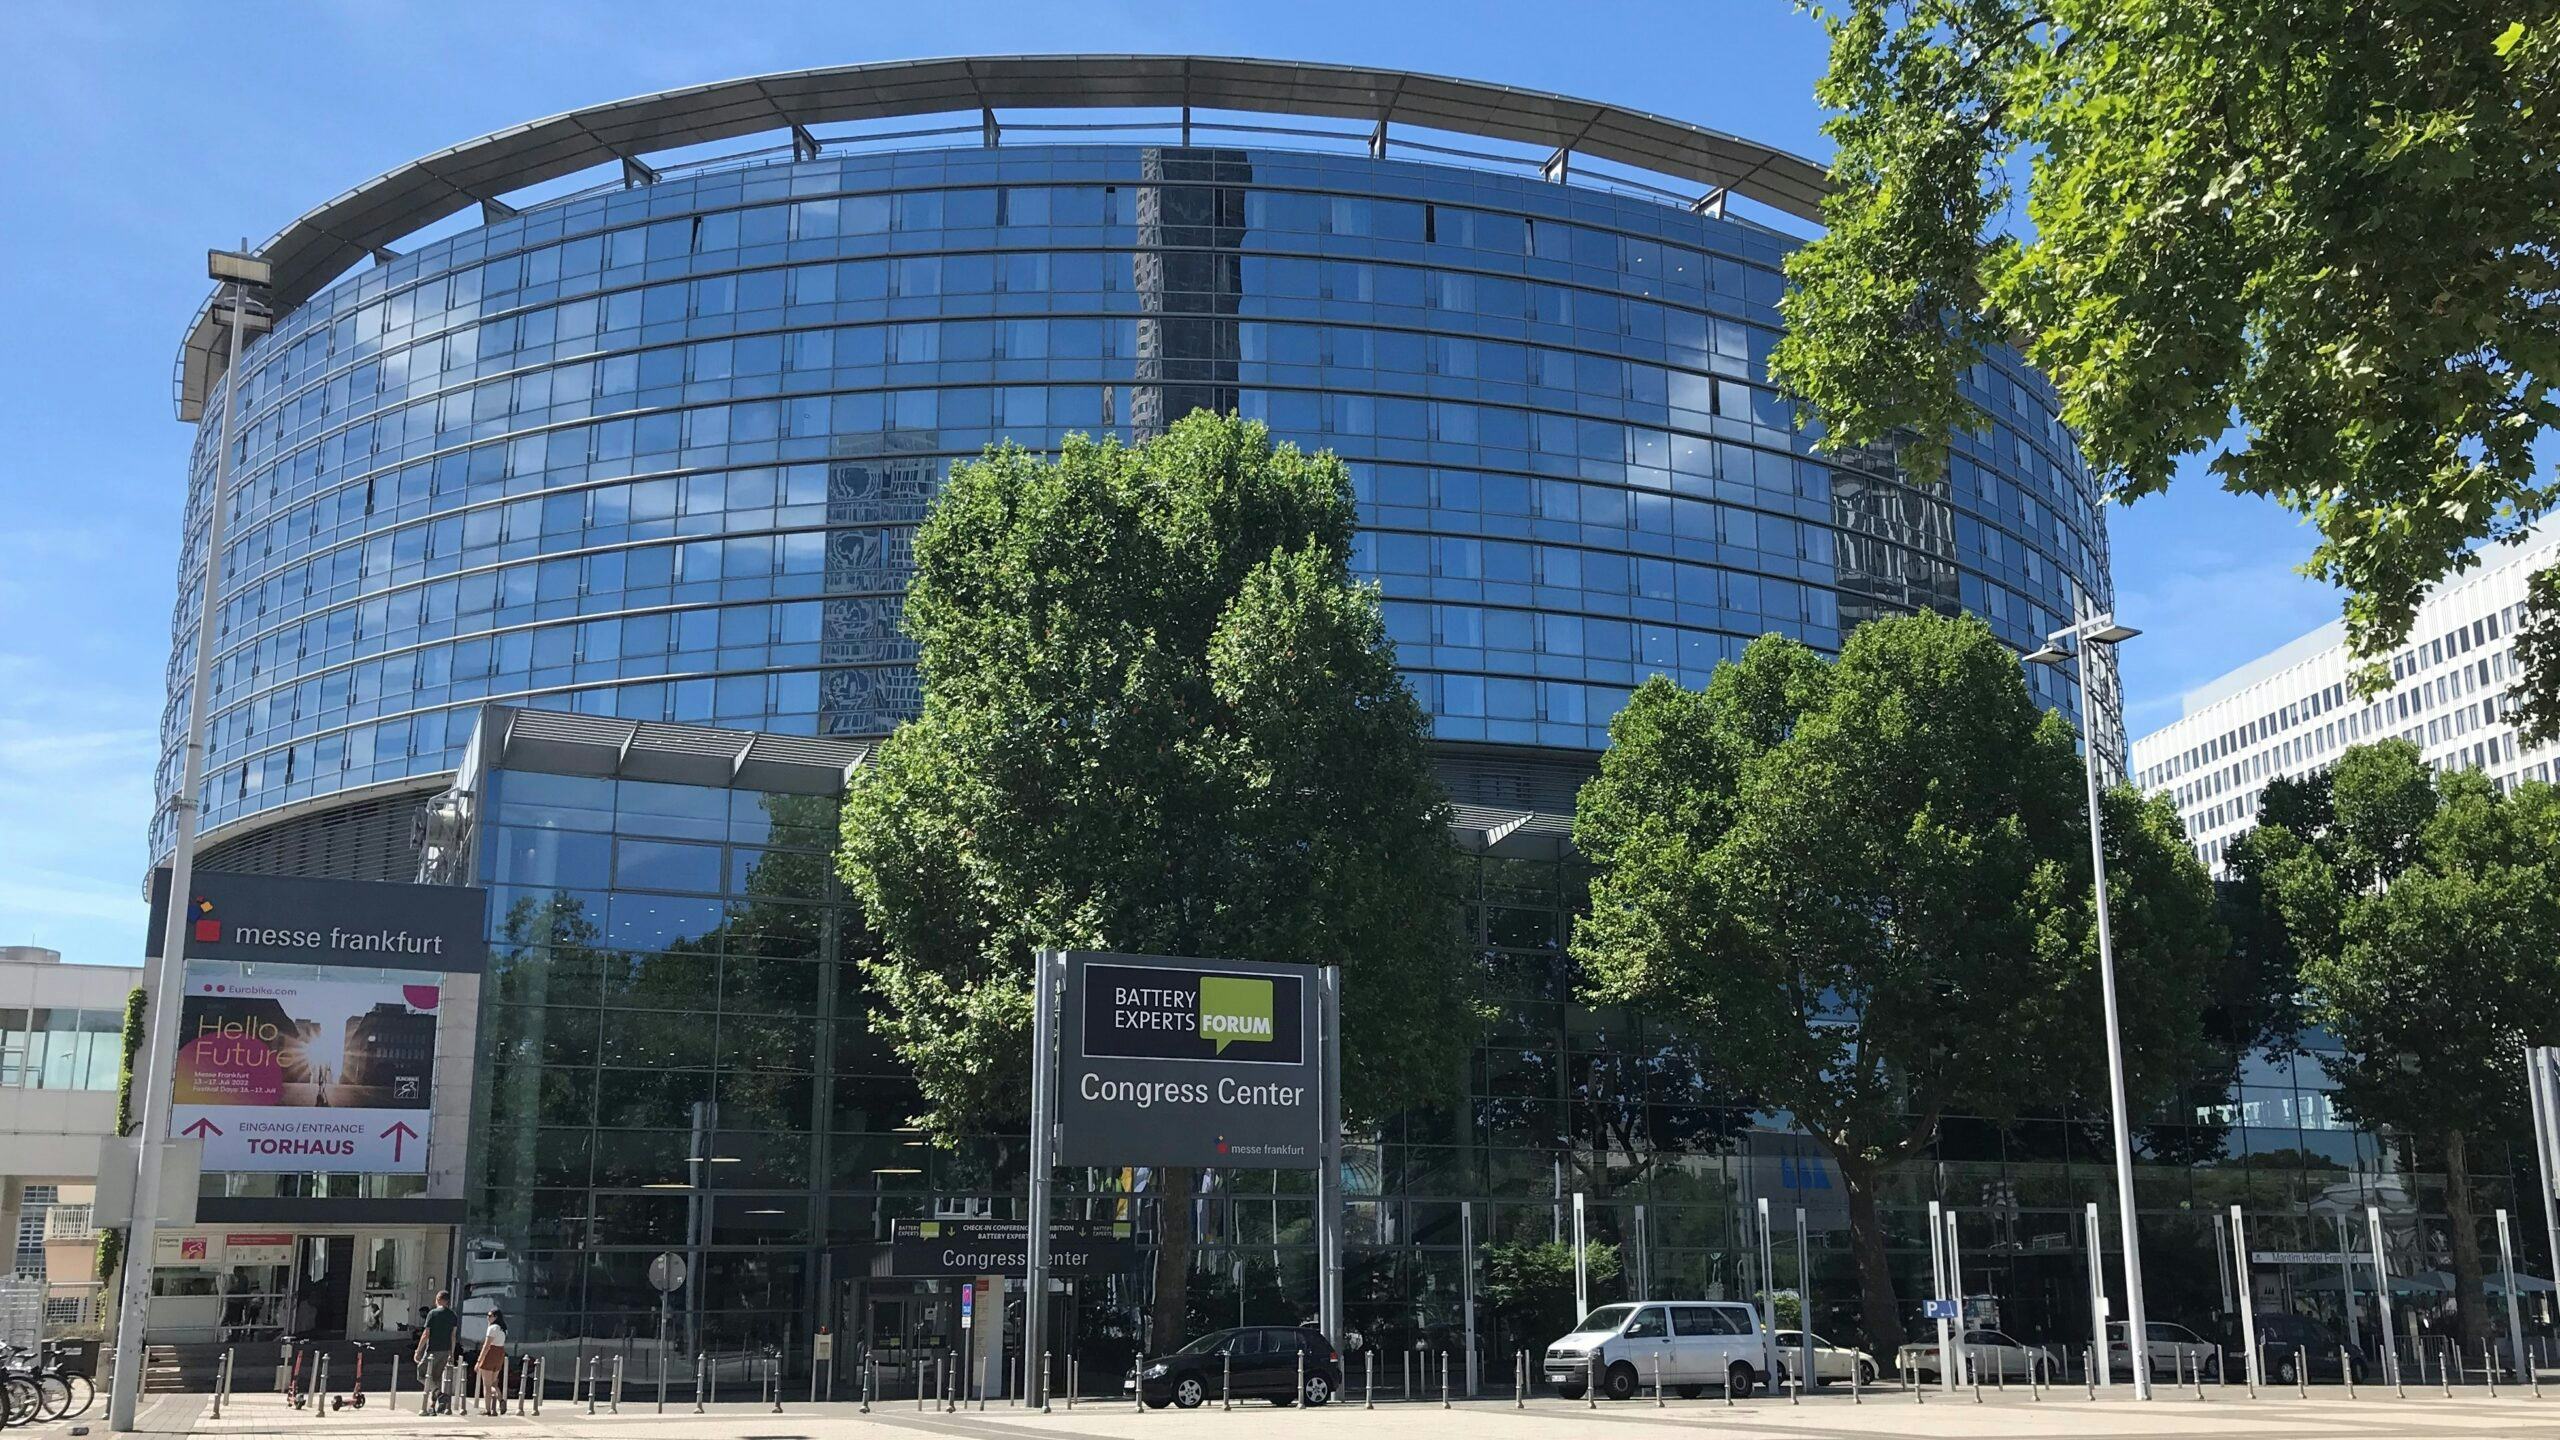 The 3-day Battery Experts Forum taking place at Frankfurt Messe is running parallel with Eurobike, giving developers, buyers and strategists access to expert presentations and tutorials in one location. - Photo Bike Europe